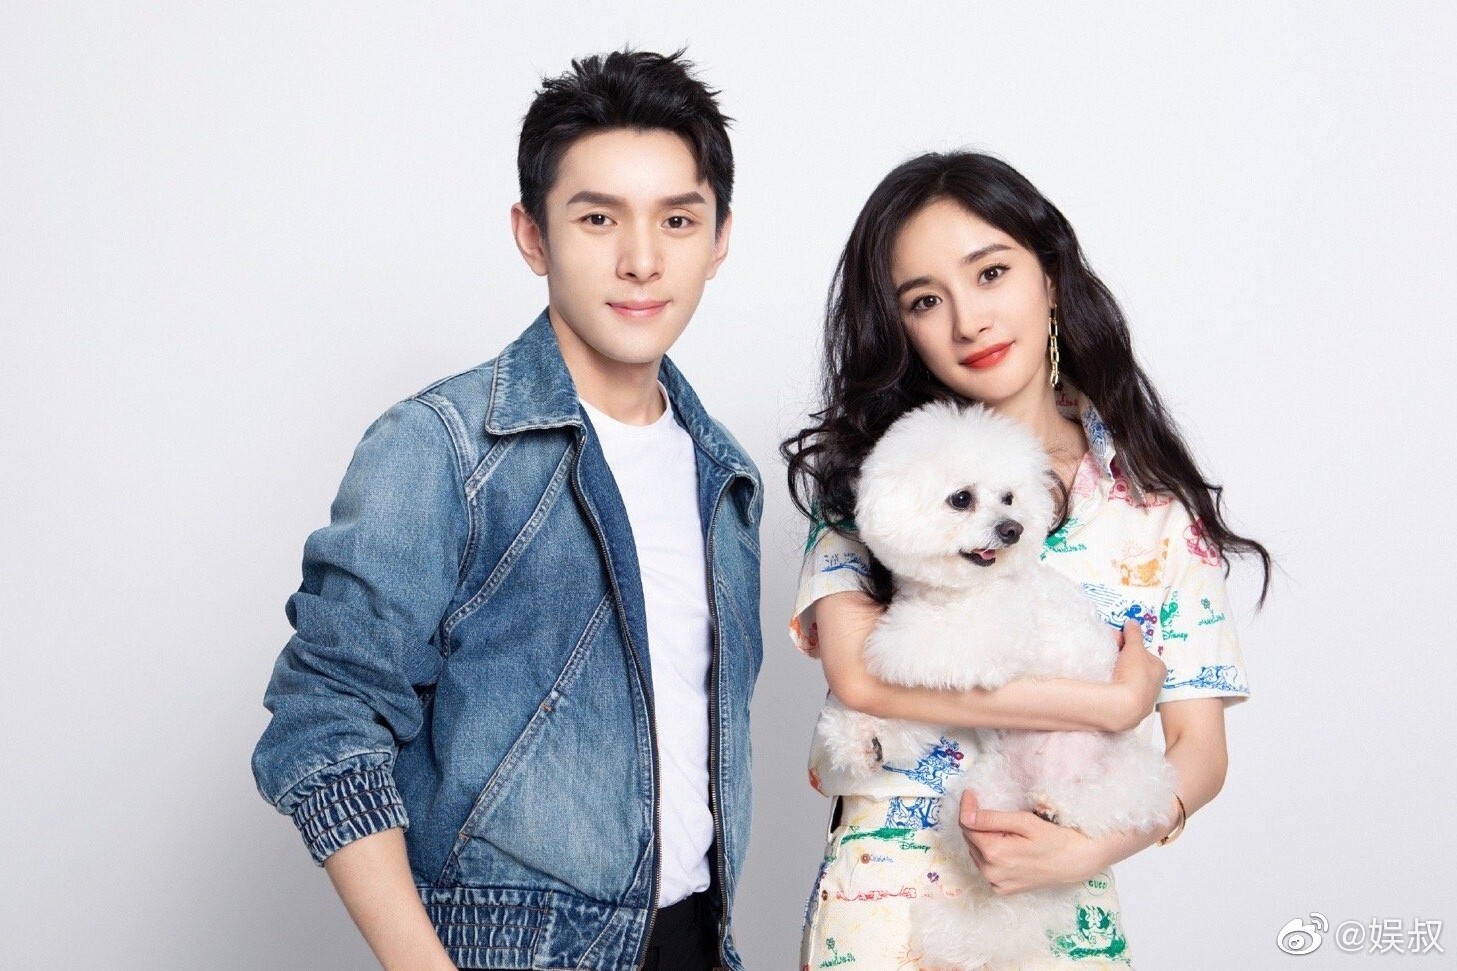 Li JIaqi and Yang Mi joined forces to sell products online during coronavirus, blurring the boundaries between conventional celebrities and live streamers. Photo: @TrendingWeibo/Twitter